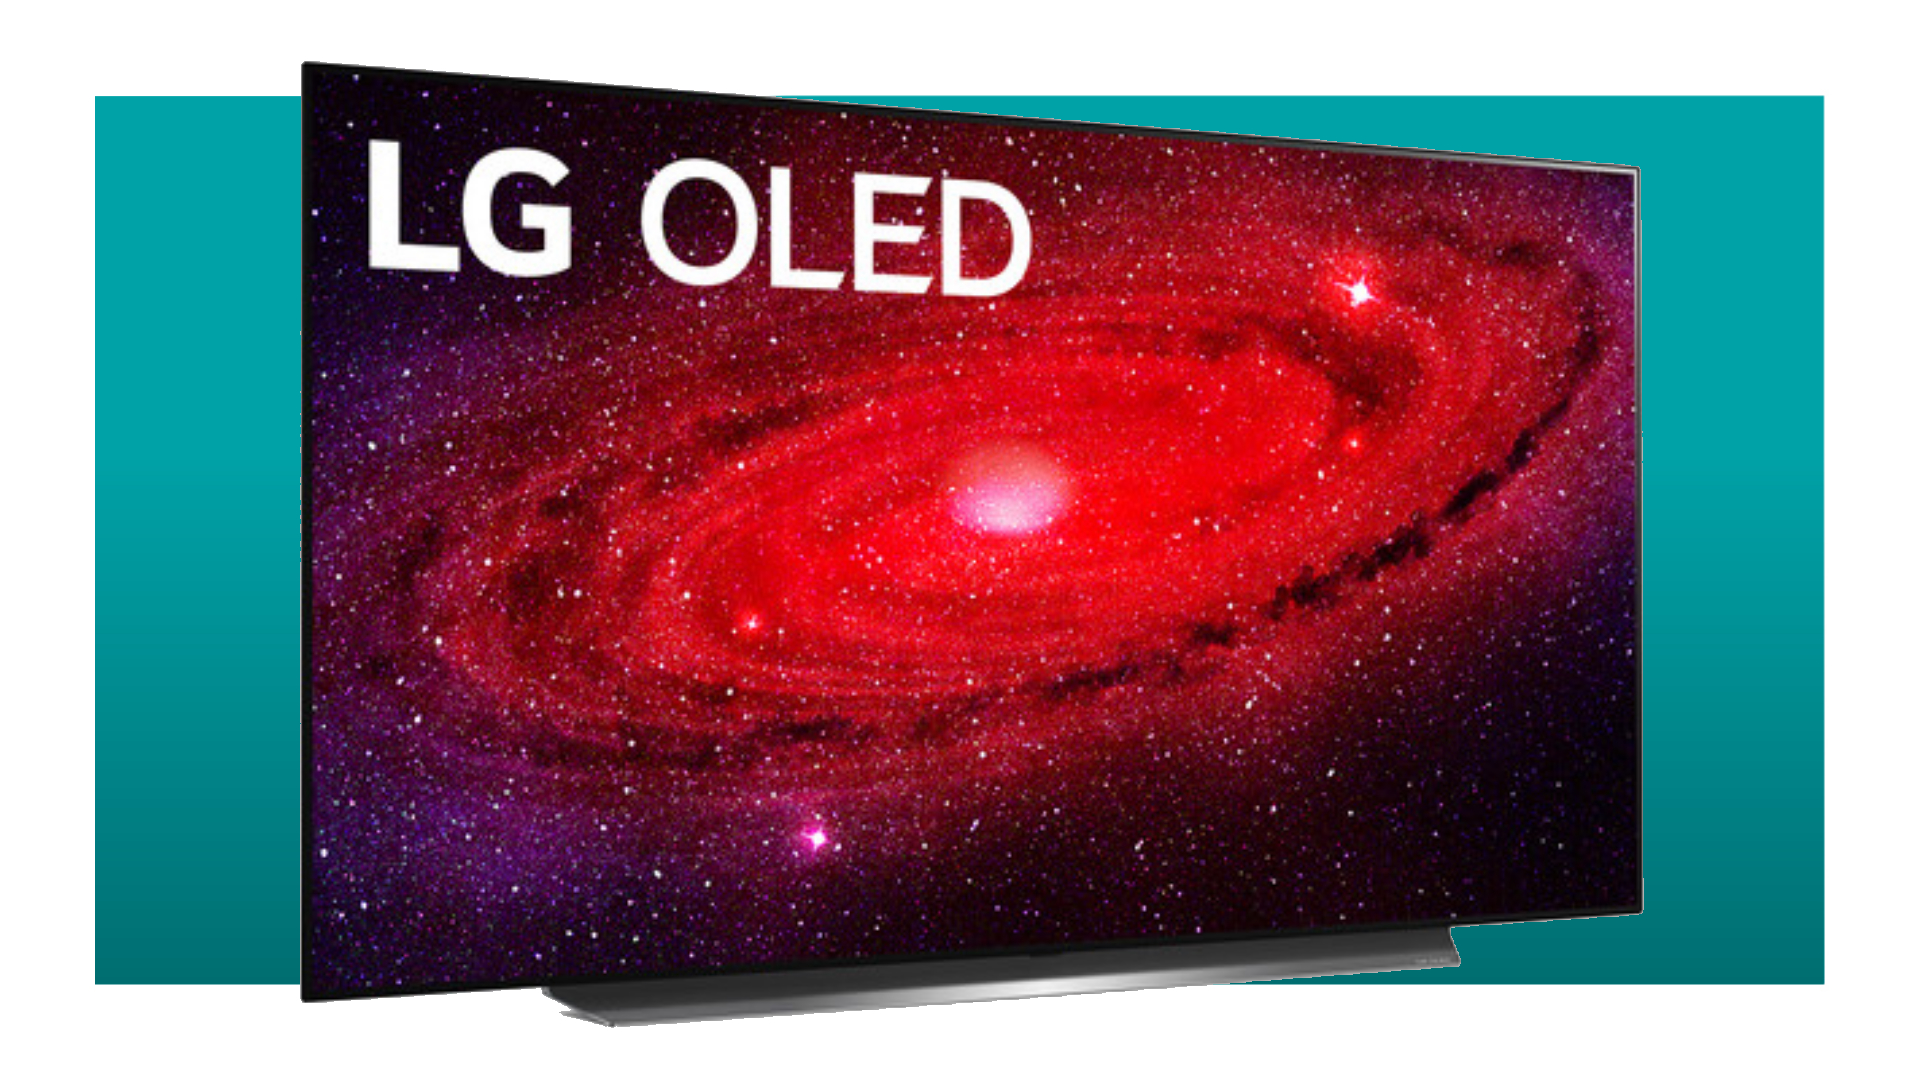 This Vast 120Hz 4K OLED Gaming TV Is $800 Off Right Now thumbnail